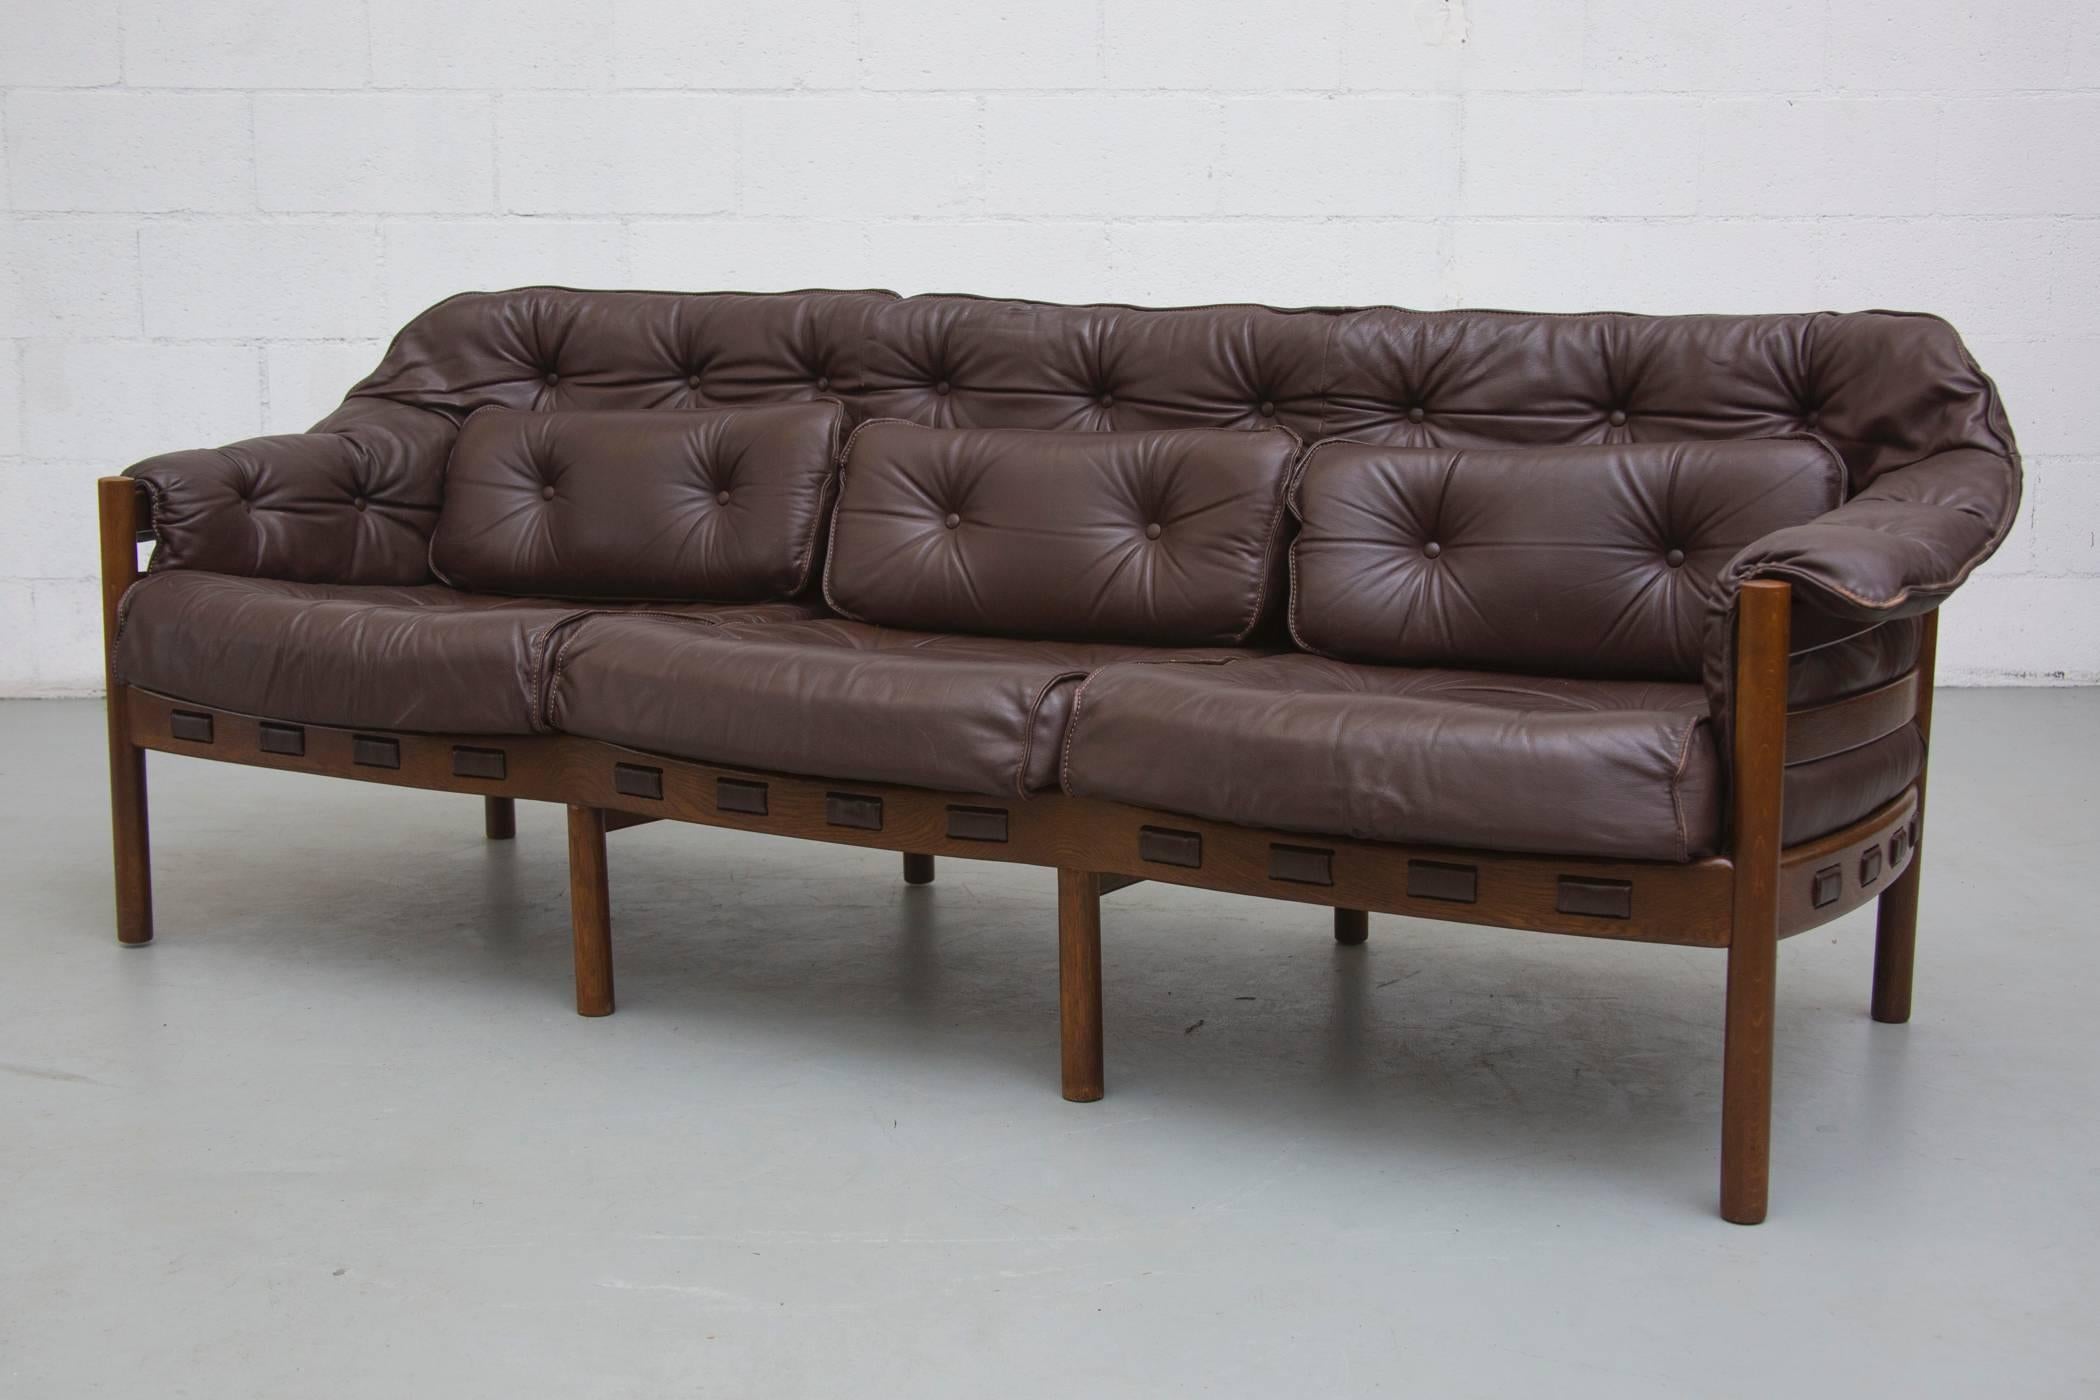 Lovely three-seat wood framed sofa with tufted leather back, seat cushions and pillows in original condition with visible signs of wear consistent with its age and usage.